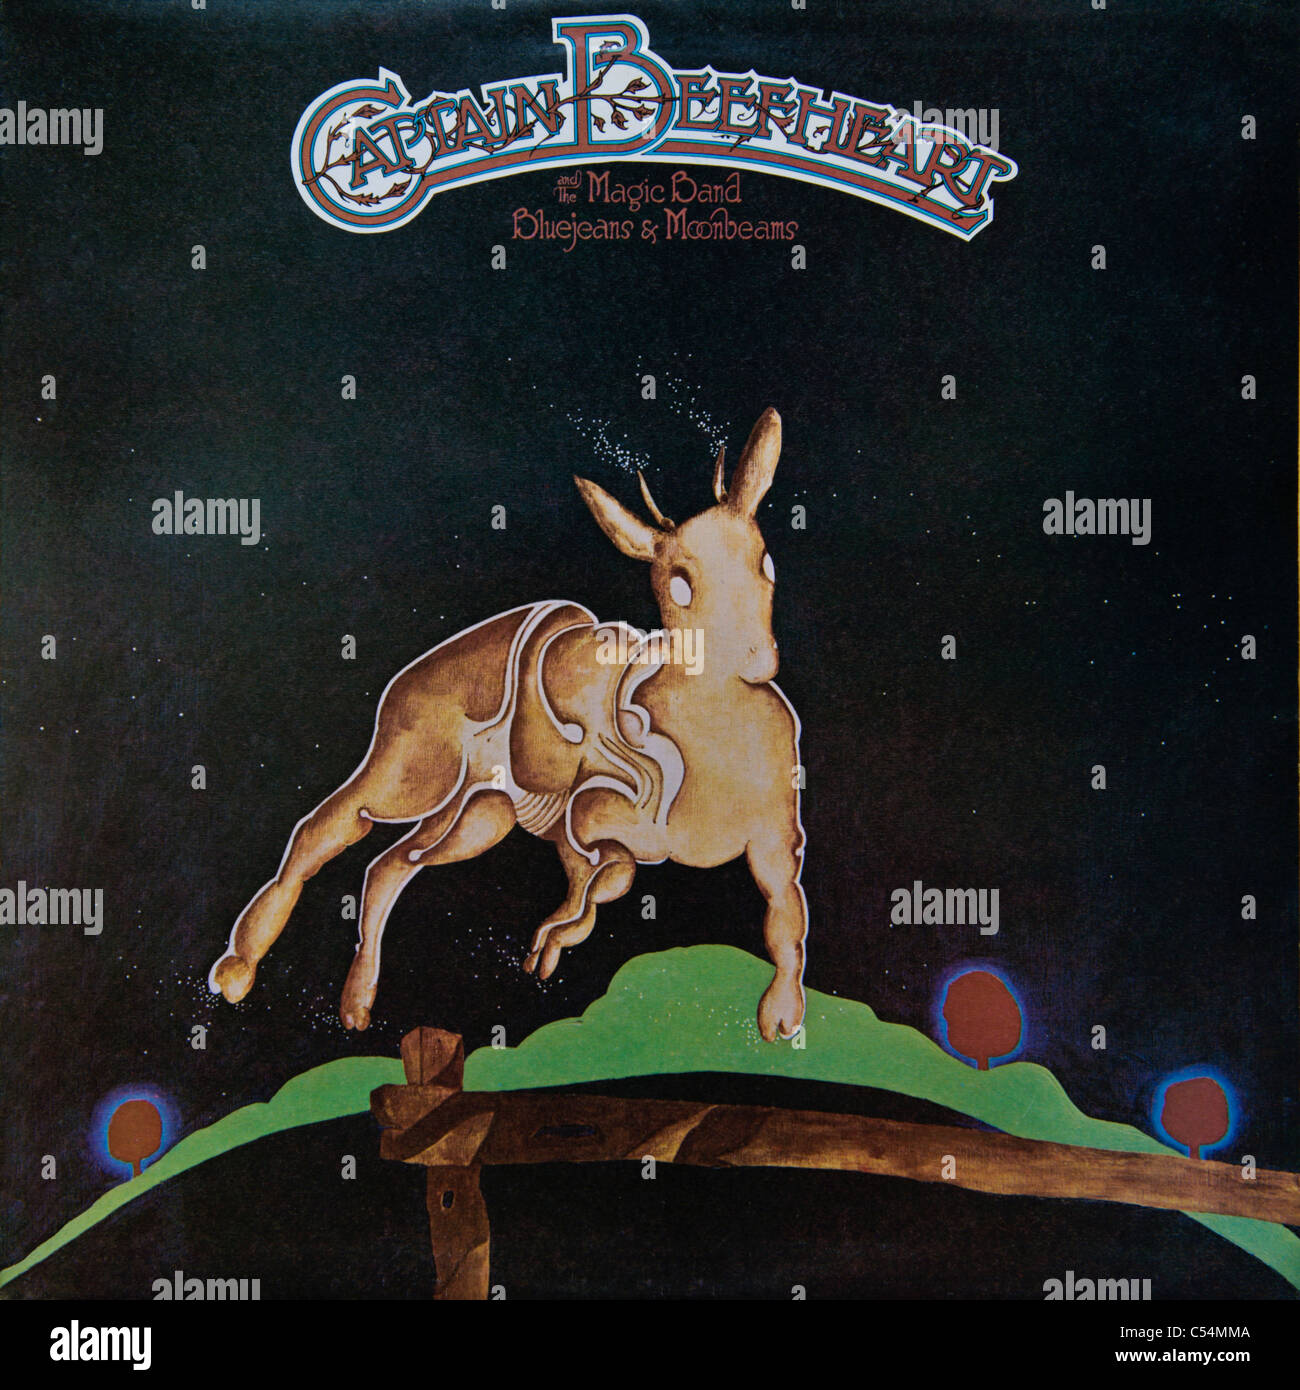 Cover of original vinyl album Bluejeans & Moonbeams by Captain Beefheart and the Magic Band released 1974 on Virgin Records Stock Photo